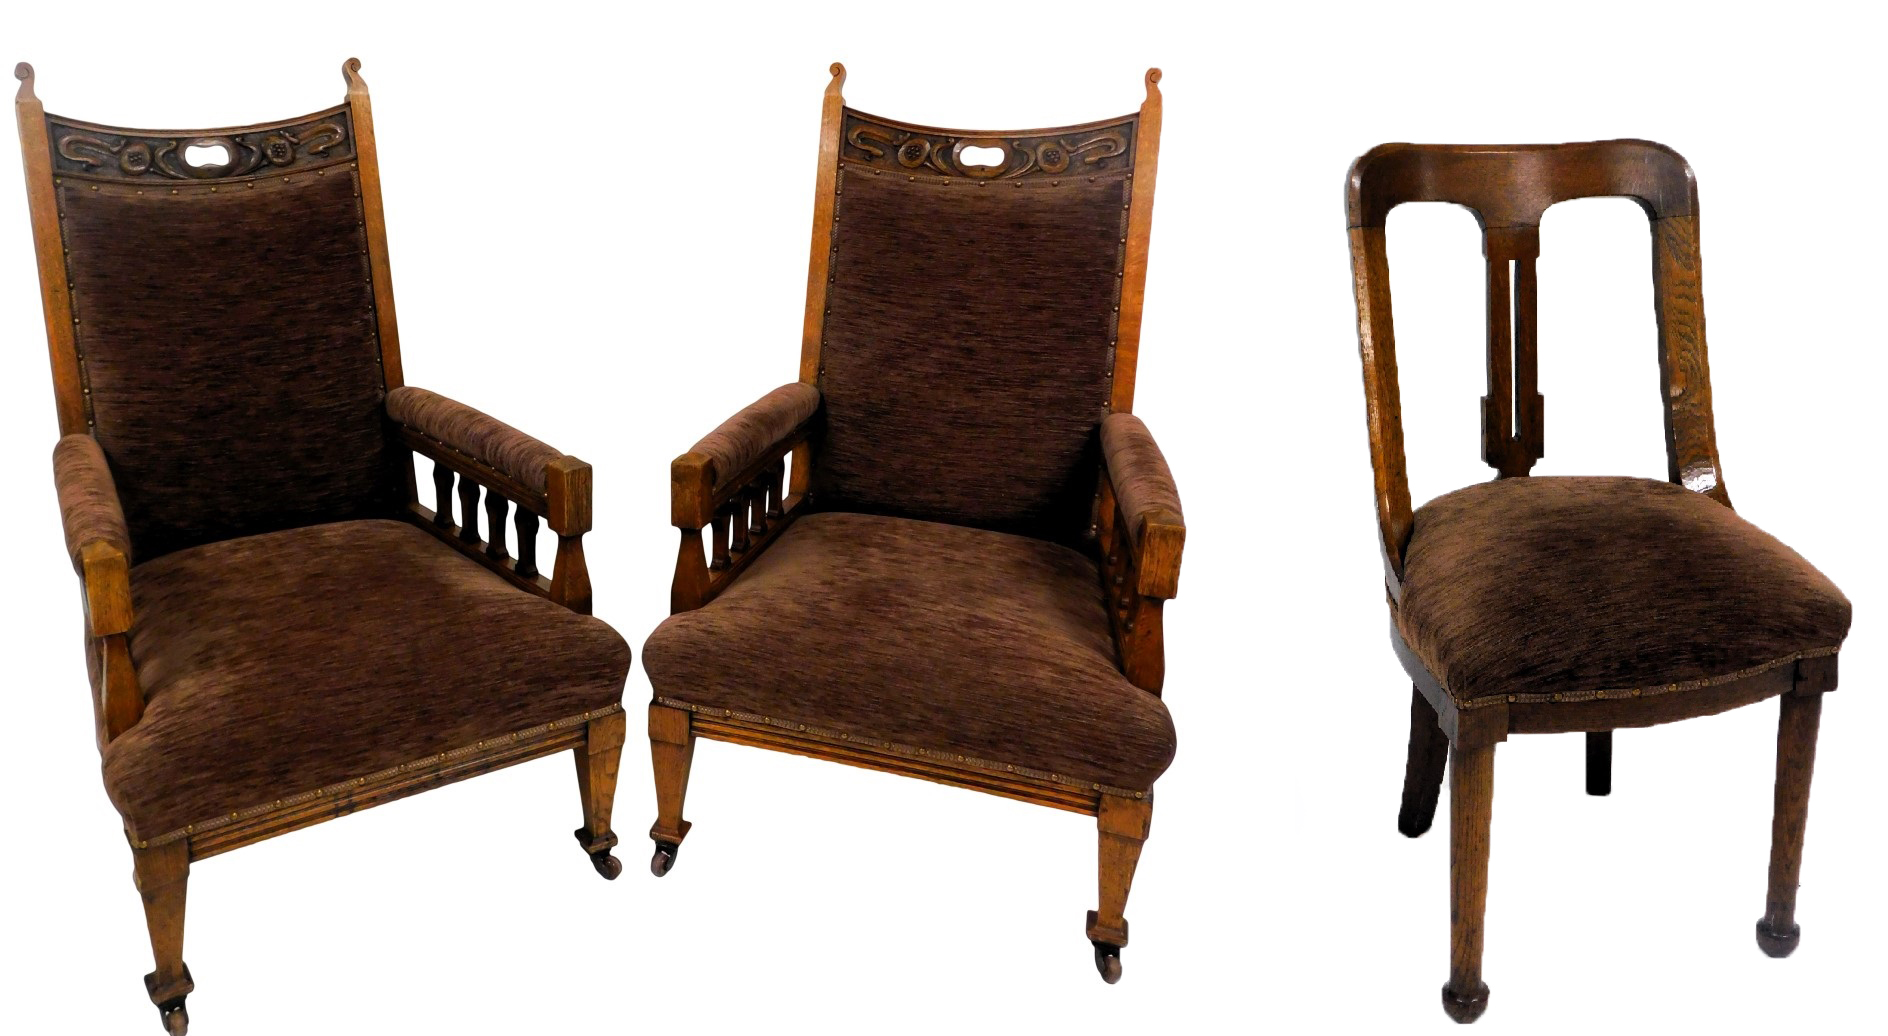 A pair of Victorian art nouveau oak armchairs, the crest rail carved with pomegranates, with overstu